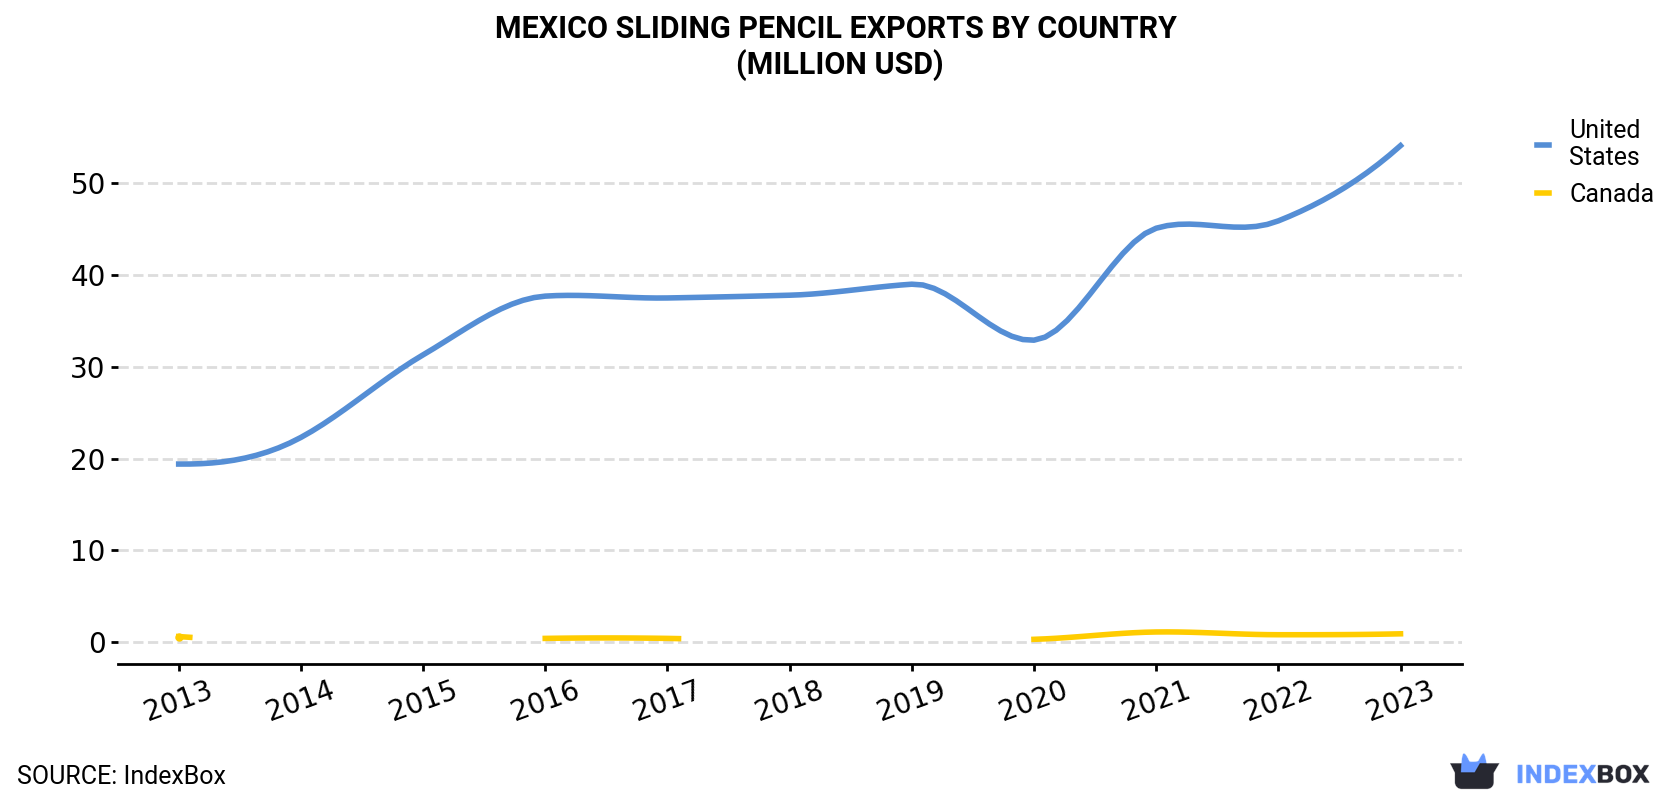 Mexico Sliding Pencil Exports By Country (Million USD)